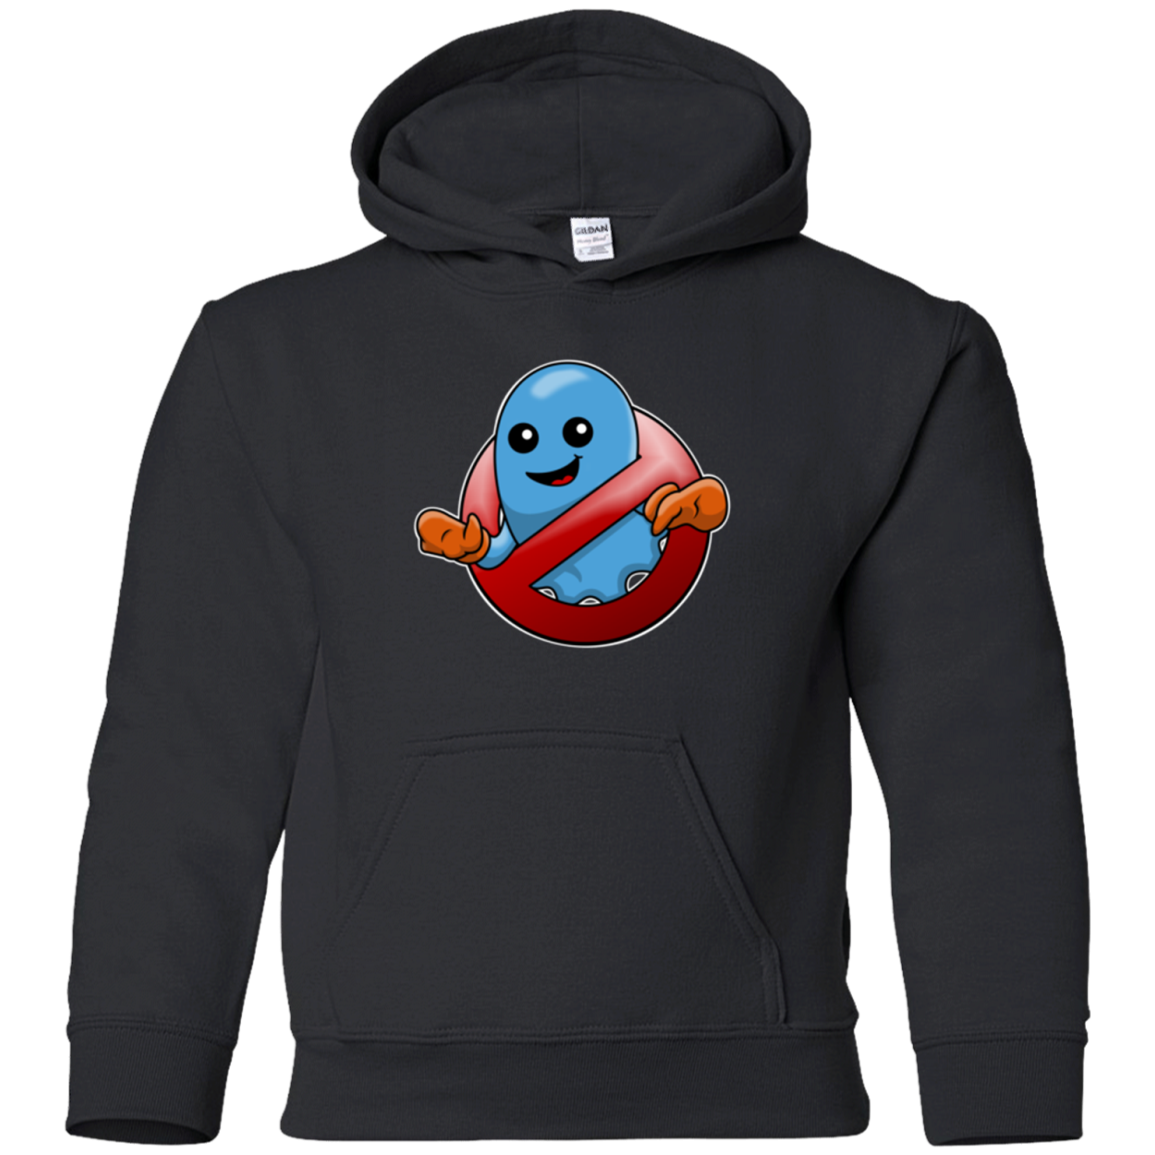 Inky Buster Youth Hoodie